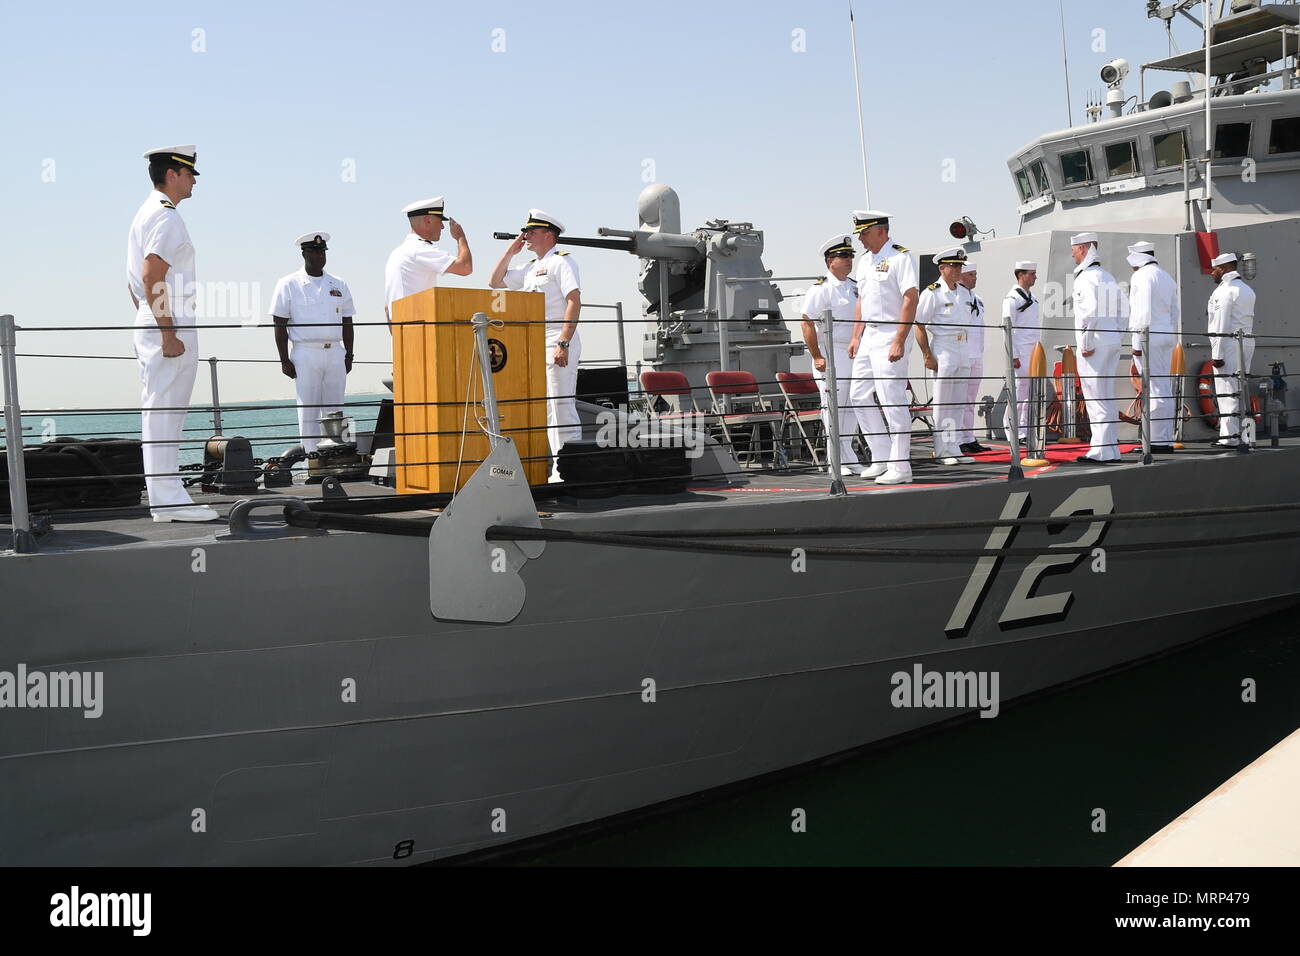 170617-N-XP344-057 MANAMA, Bahrain (June 27, 2017) From left, Lt. Cmdr. Timothy Yuhas, a native of Cave Creek, Arizona and former commanding officer of the Cyclone-class coastal patrol ship USS Thunderbolt (PC 12), salutes Lt. Cmdr. Michael T. McArawas, a native of Erie, Pennsylvania and current commanding officer, during a change of command ceremony held shipboard while pierside at Naval Support Activity Bahrain. Thunderbolt is one of 10 PCs forward deployed to Manama, Bahrain, whose mission is coastal patrol and interdiction surveillance. (U.S. Navy photo by Mass Communication Specialist 2nd Stock Photo